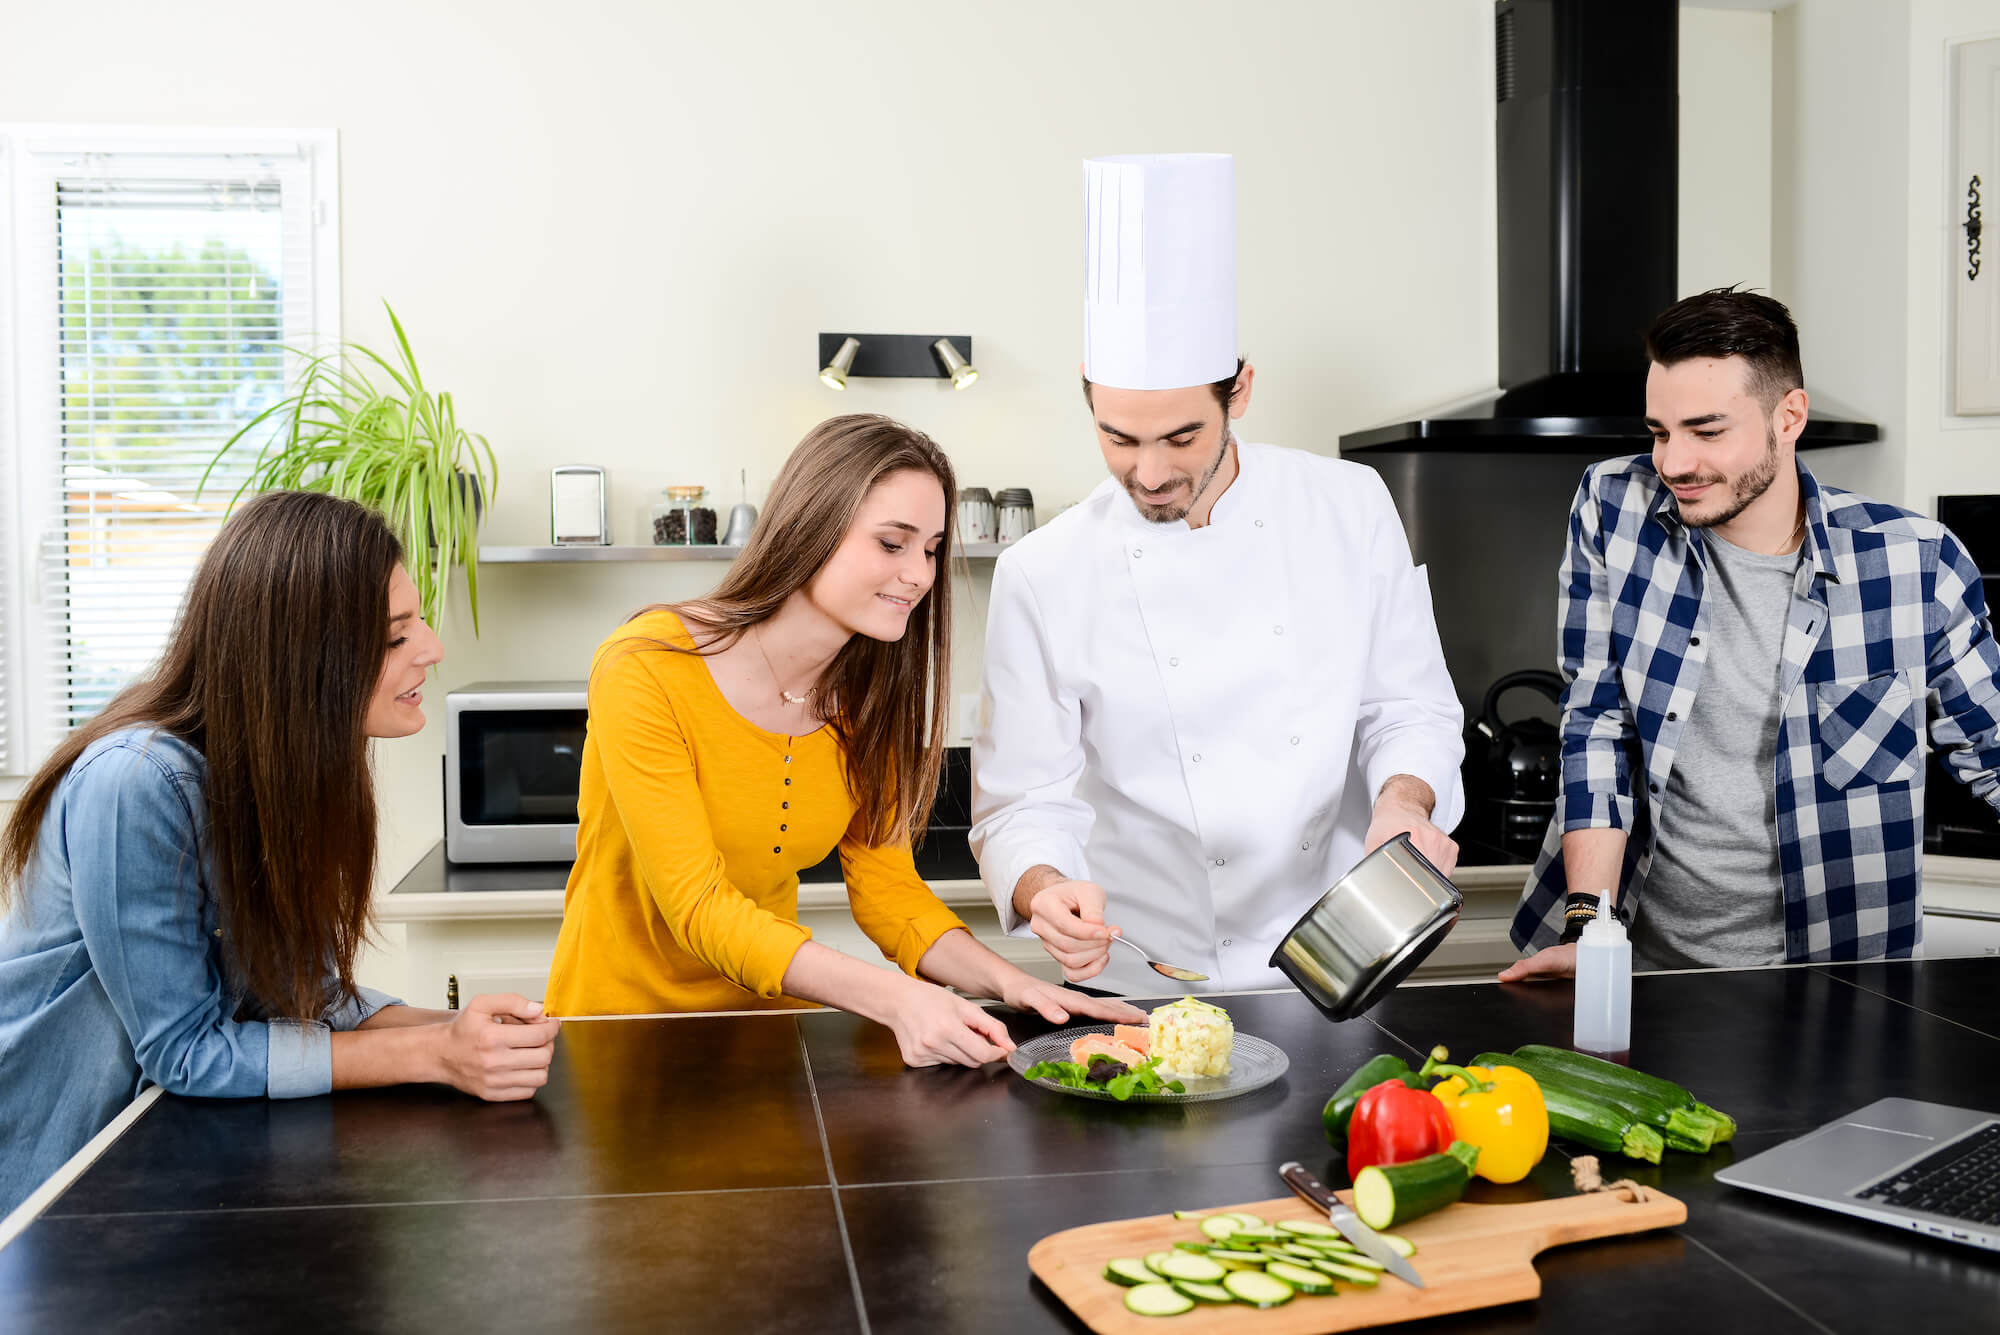 personal chef jobs belle isle florida, belle isle florida private chefs